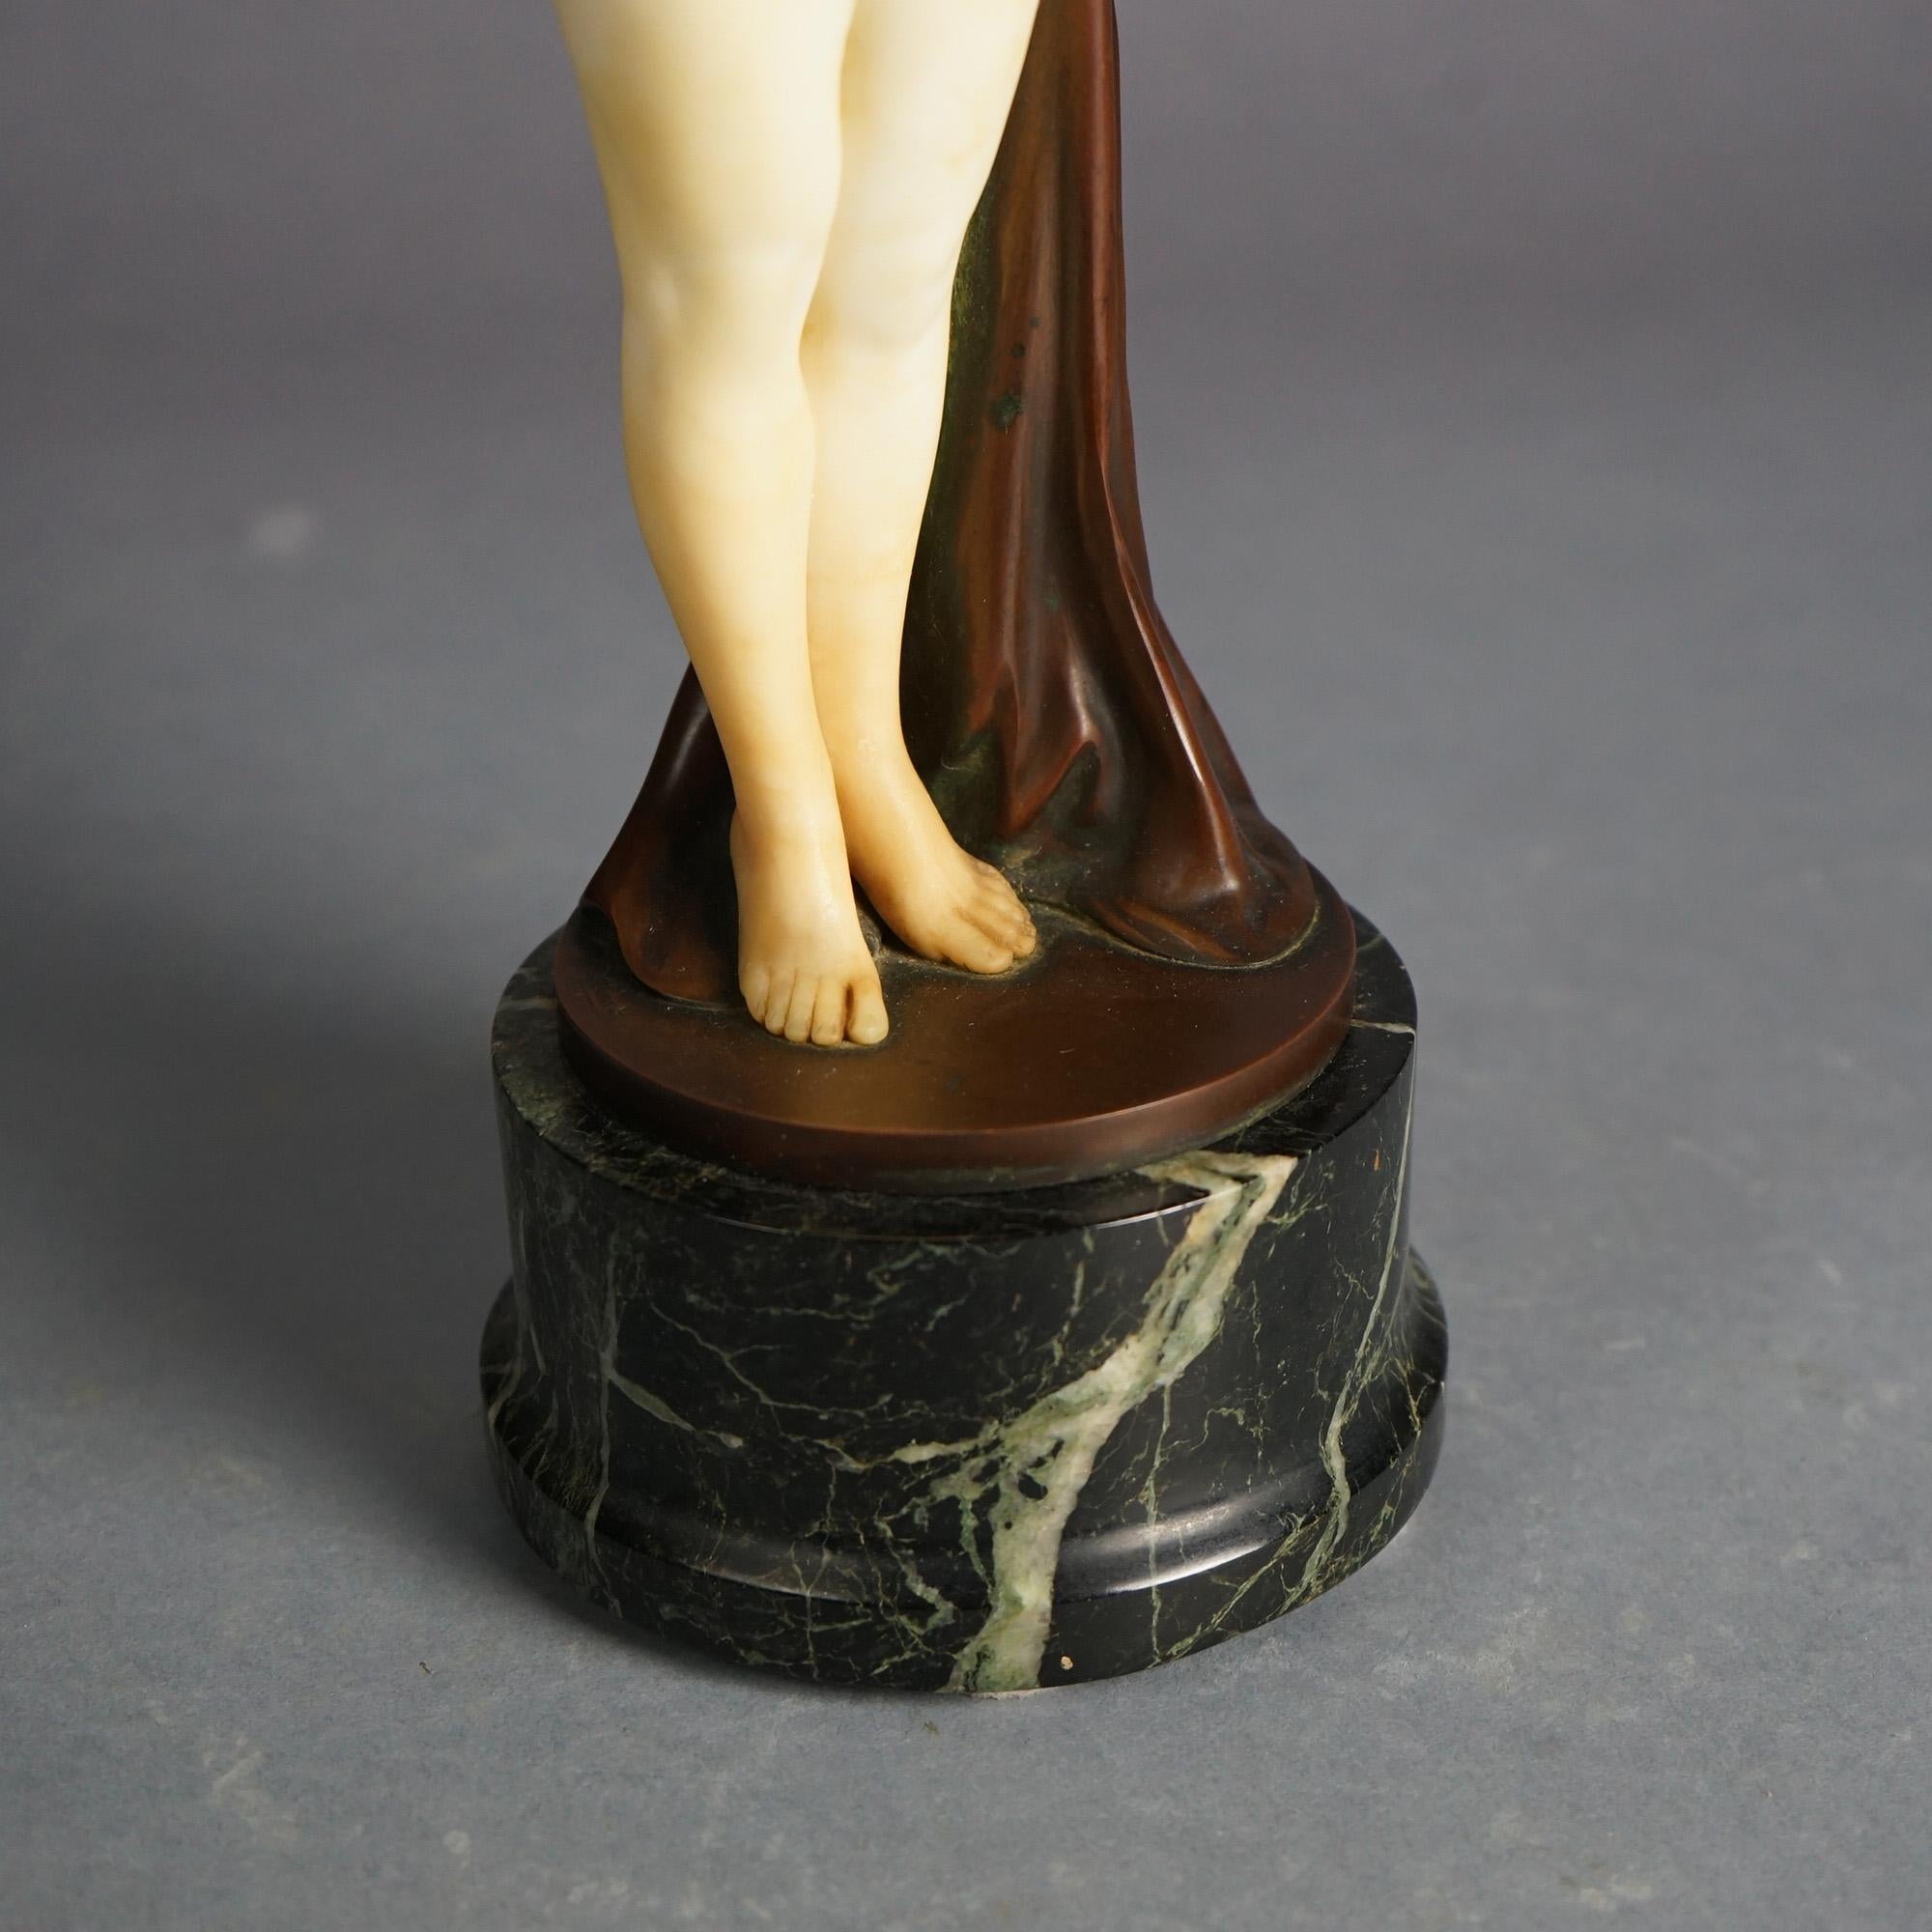 Rizec Signed Alabaster Bronze & Marble Sculpture of a Woman by Schumacher C1920 For Sale 1